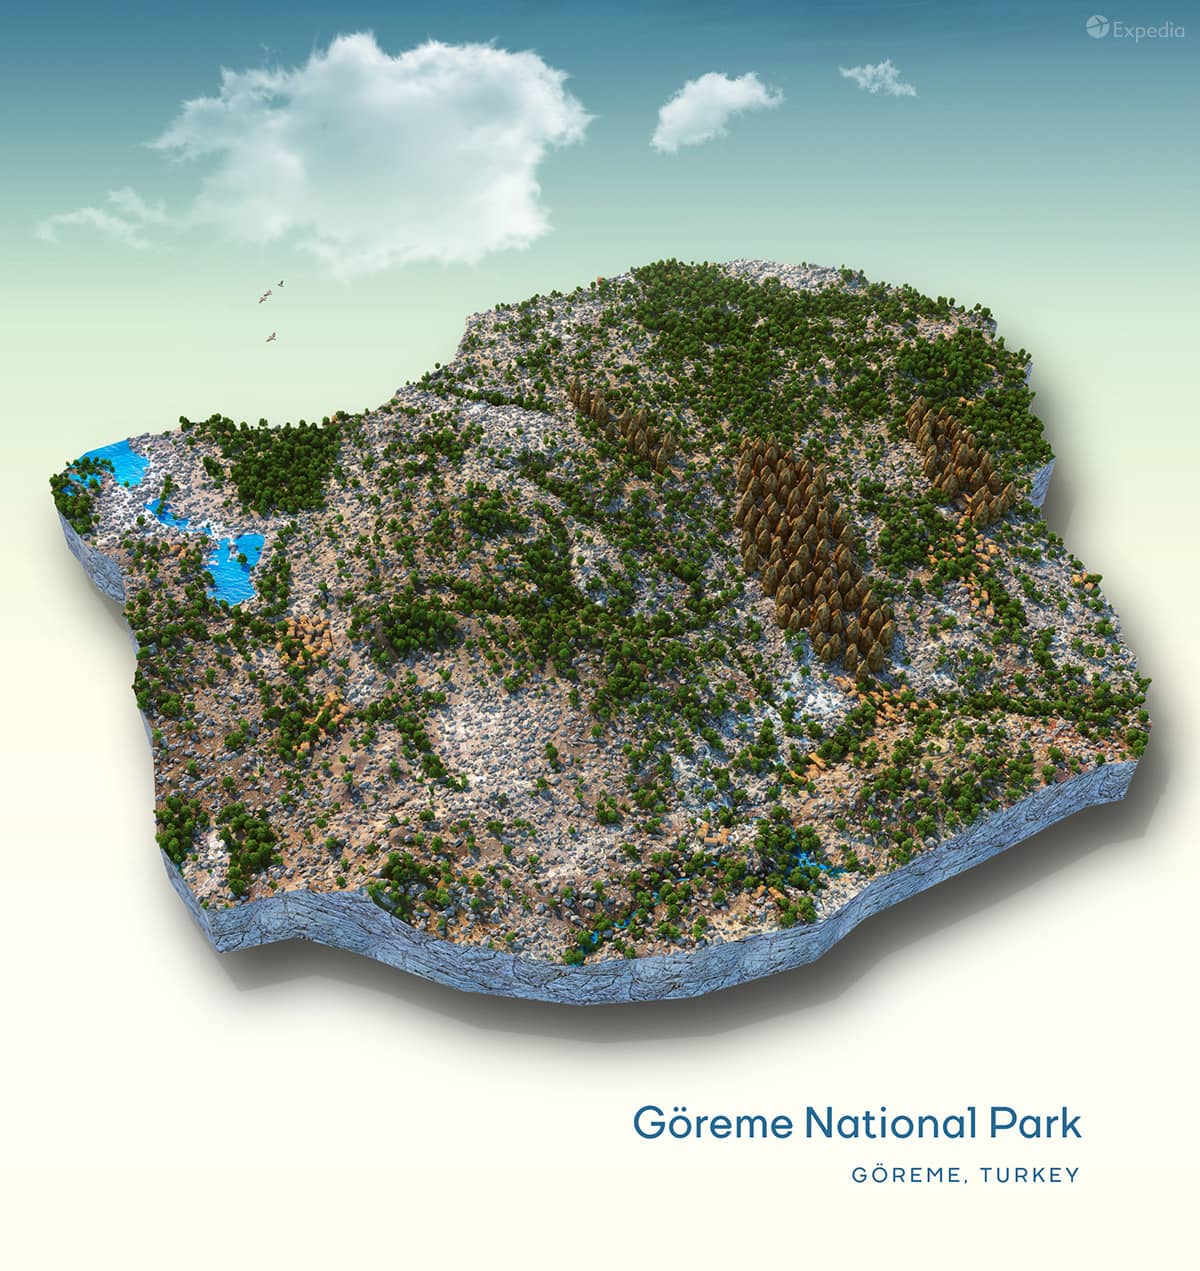 A creative topographic map rendering of Goreme National Park in Turkey